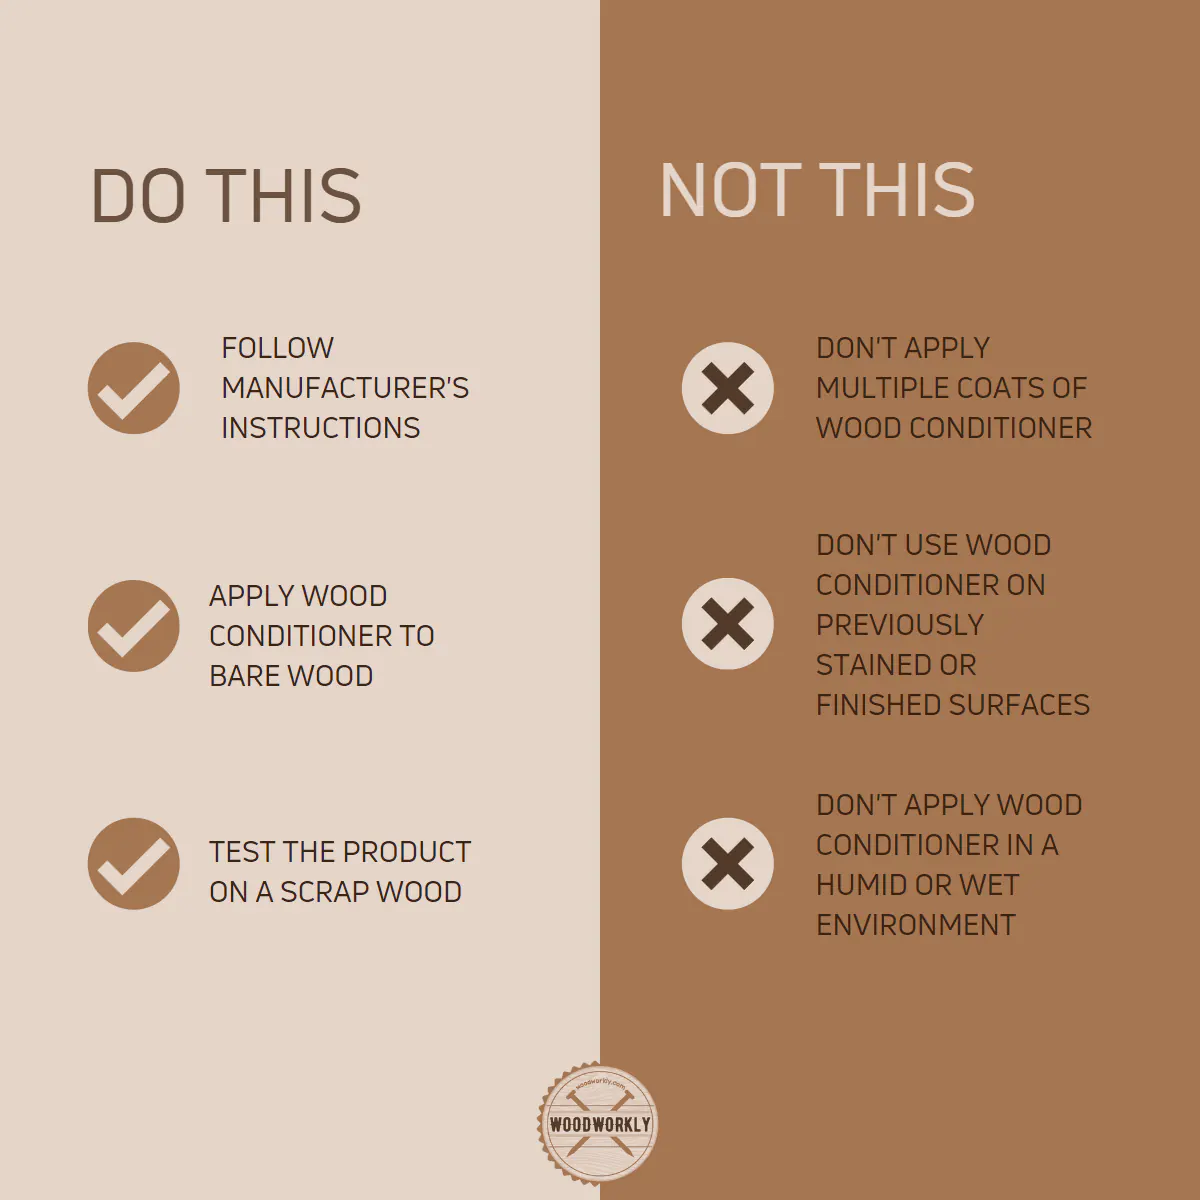 Dos and don'ts when using wood conditioners